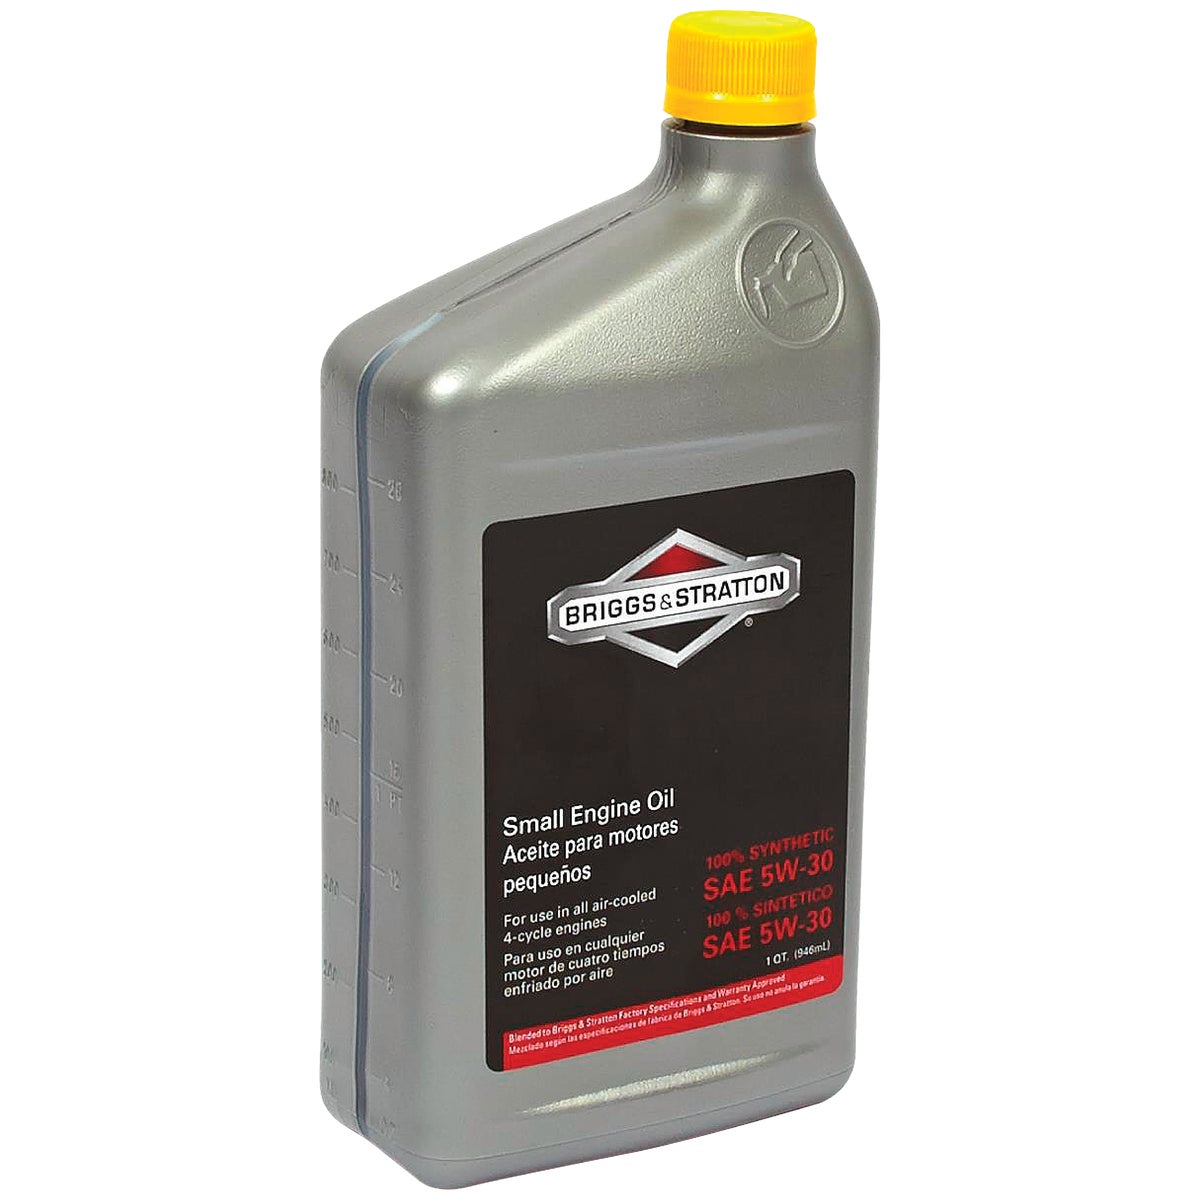 Item 723613, 100% synthetic SAE 5W-30 small engine oil is for use in all air cooled 4-